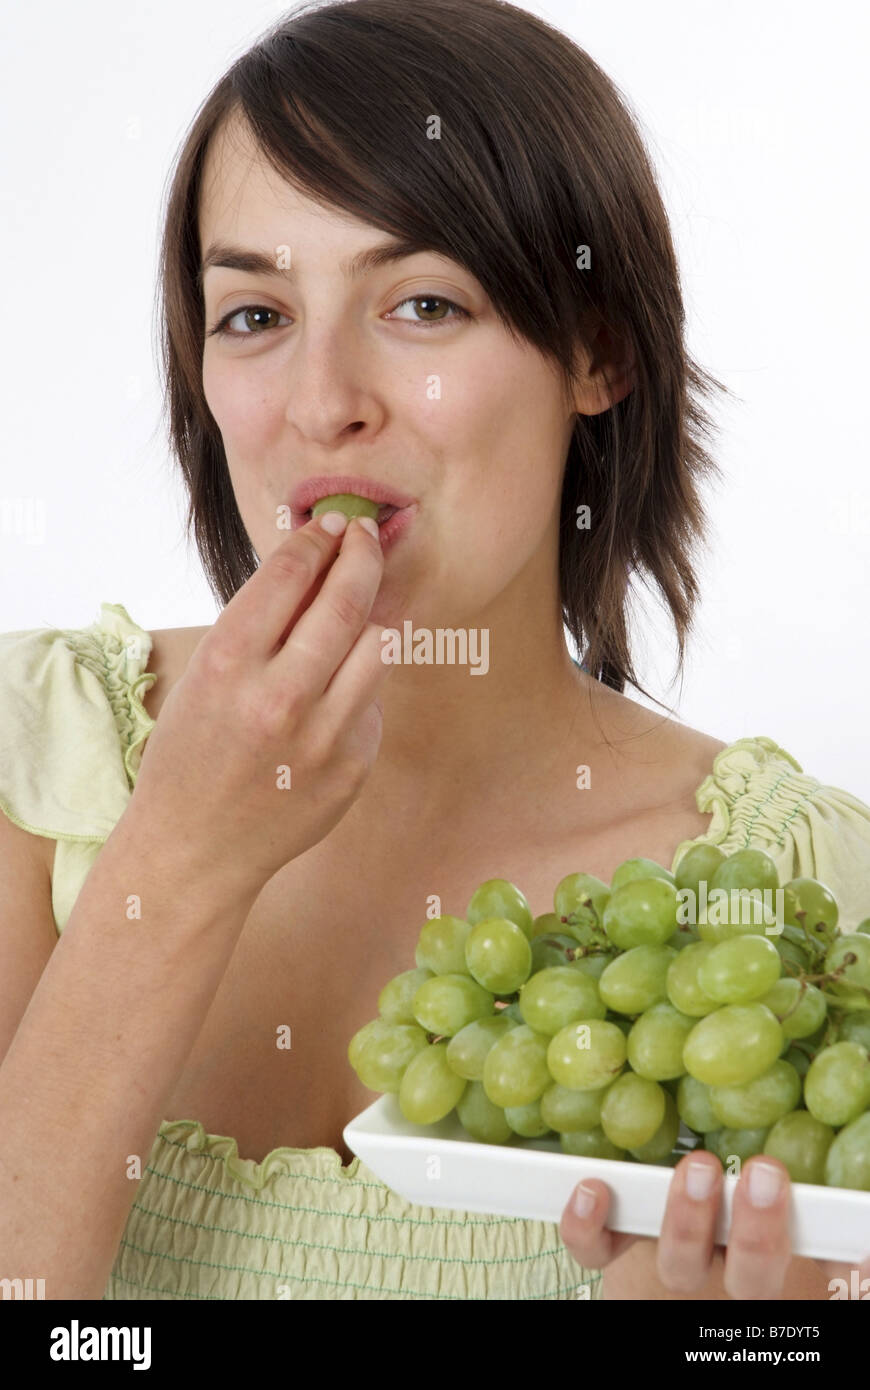 young woman with grapes Stock Photo